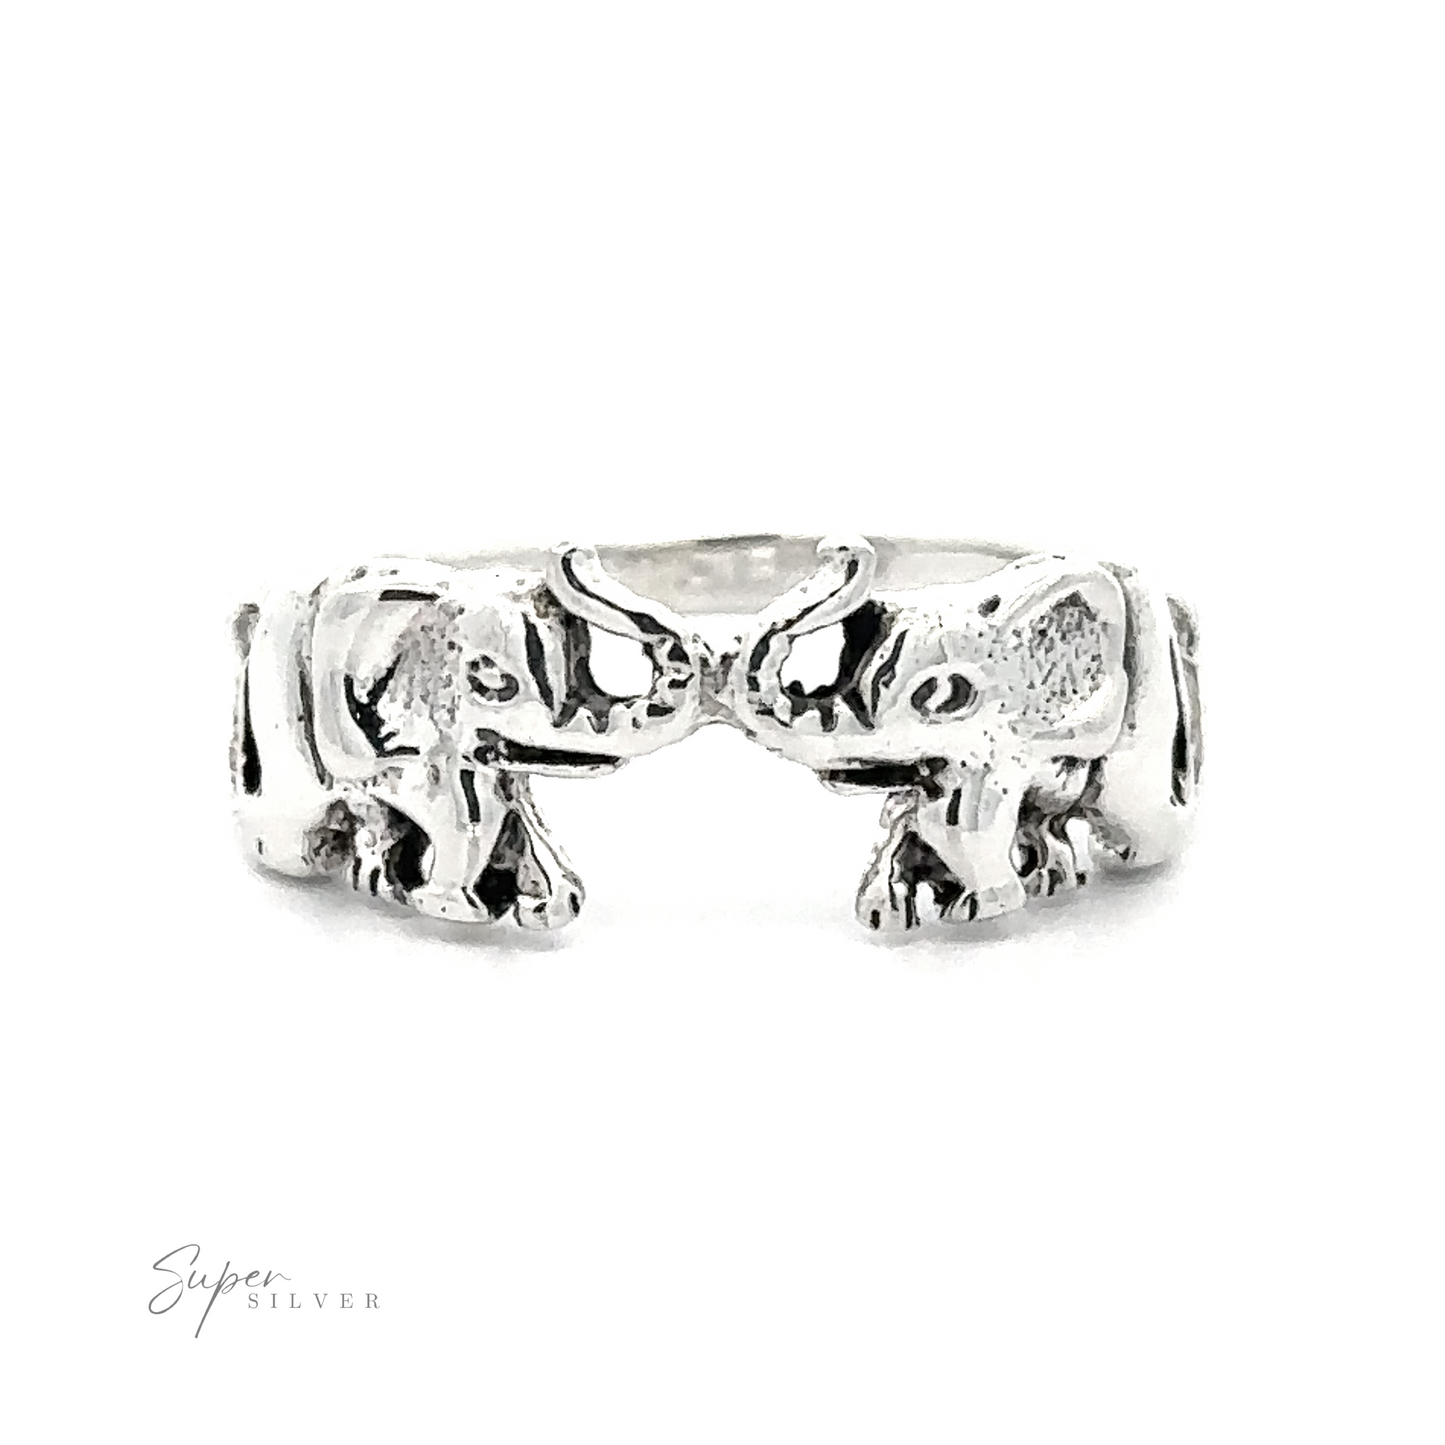 Sterling silver Elephant Pair Ring featuring elephant figures facing each other with playful affection.